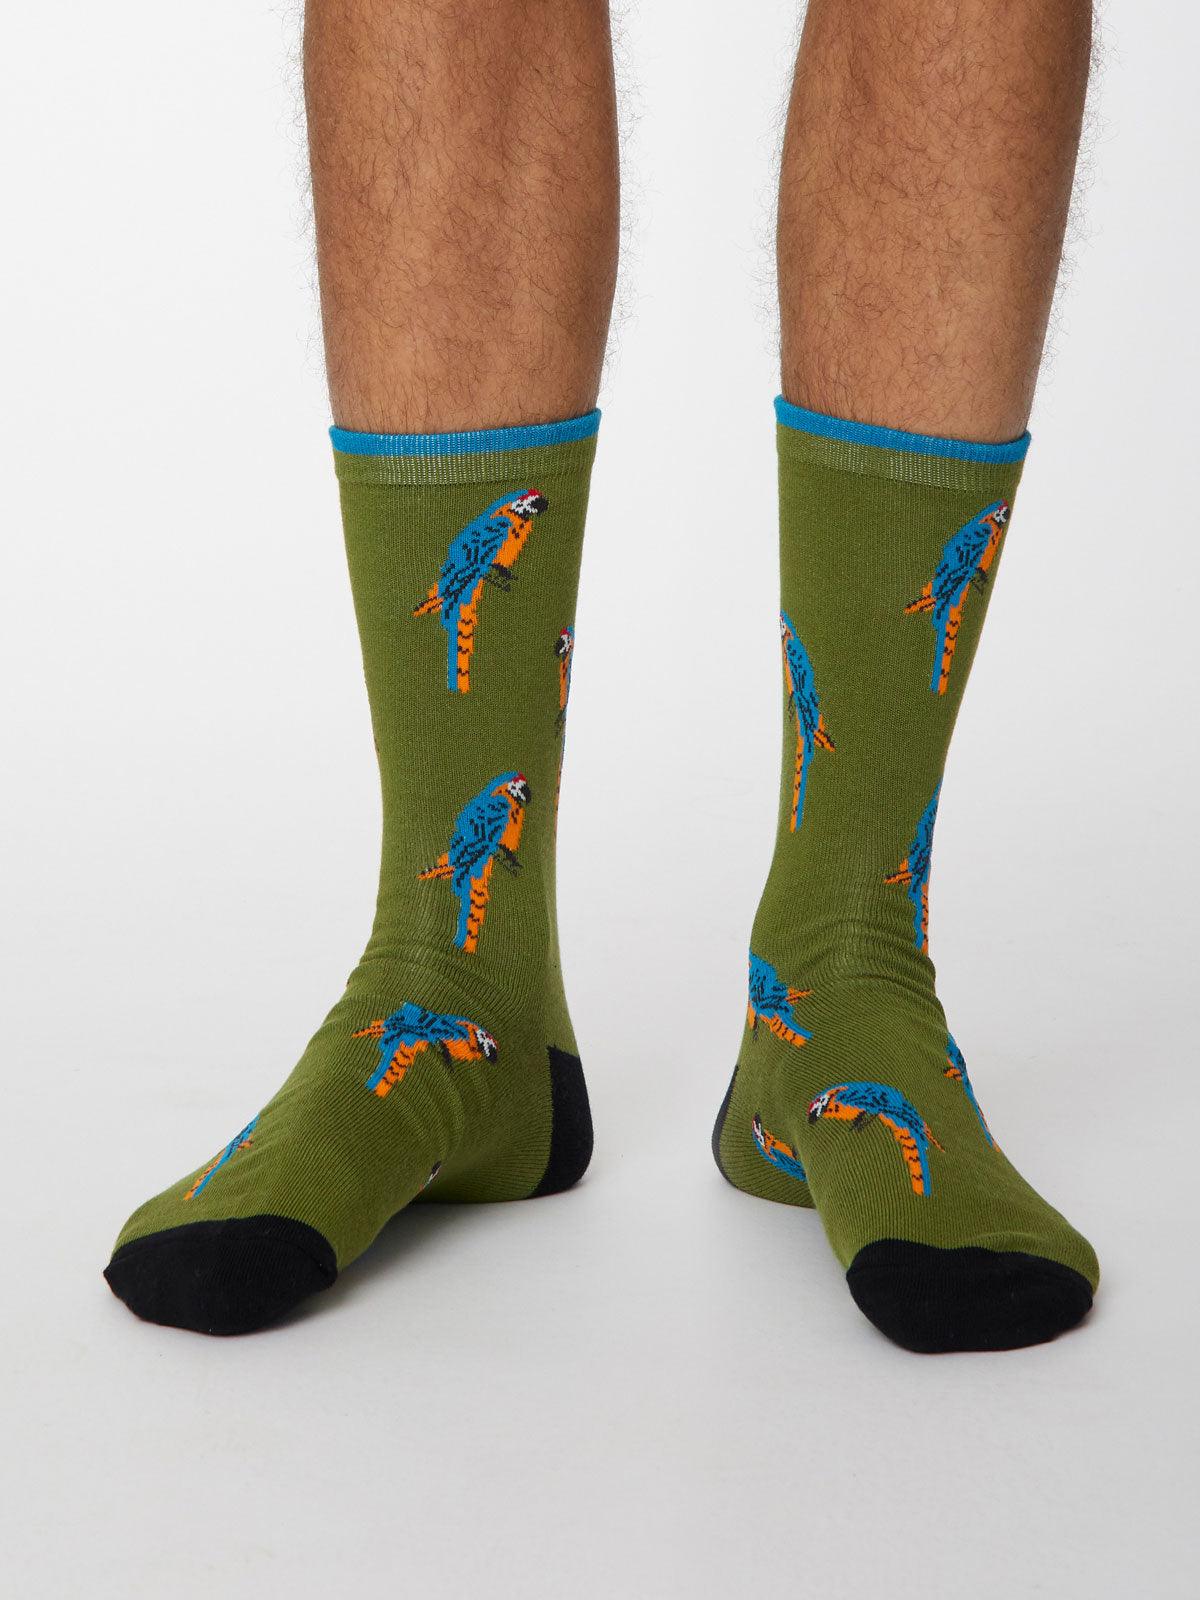 Pappagallo Bamboo Parrot Socks - Olive Green - Thought Clothing UK